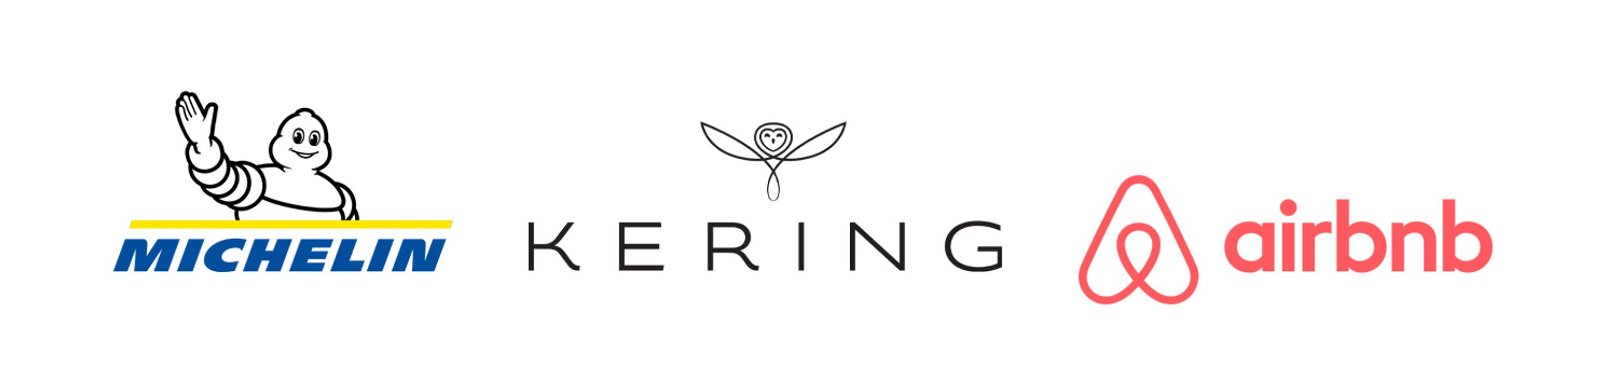 Figure 2: Shows the logos of the discussed companies, Michelin, Kering and Airbnb